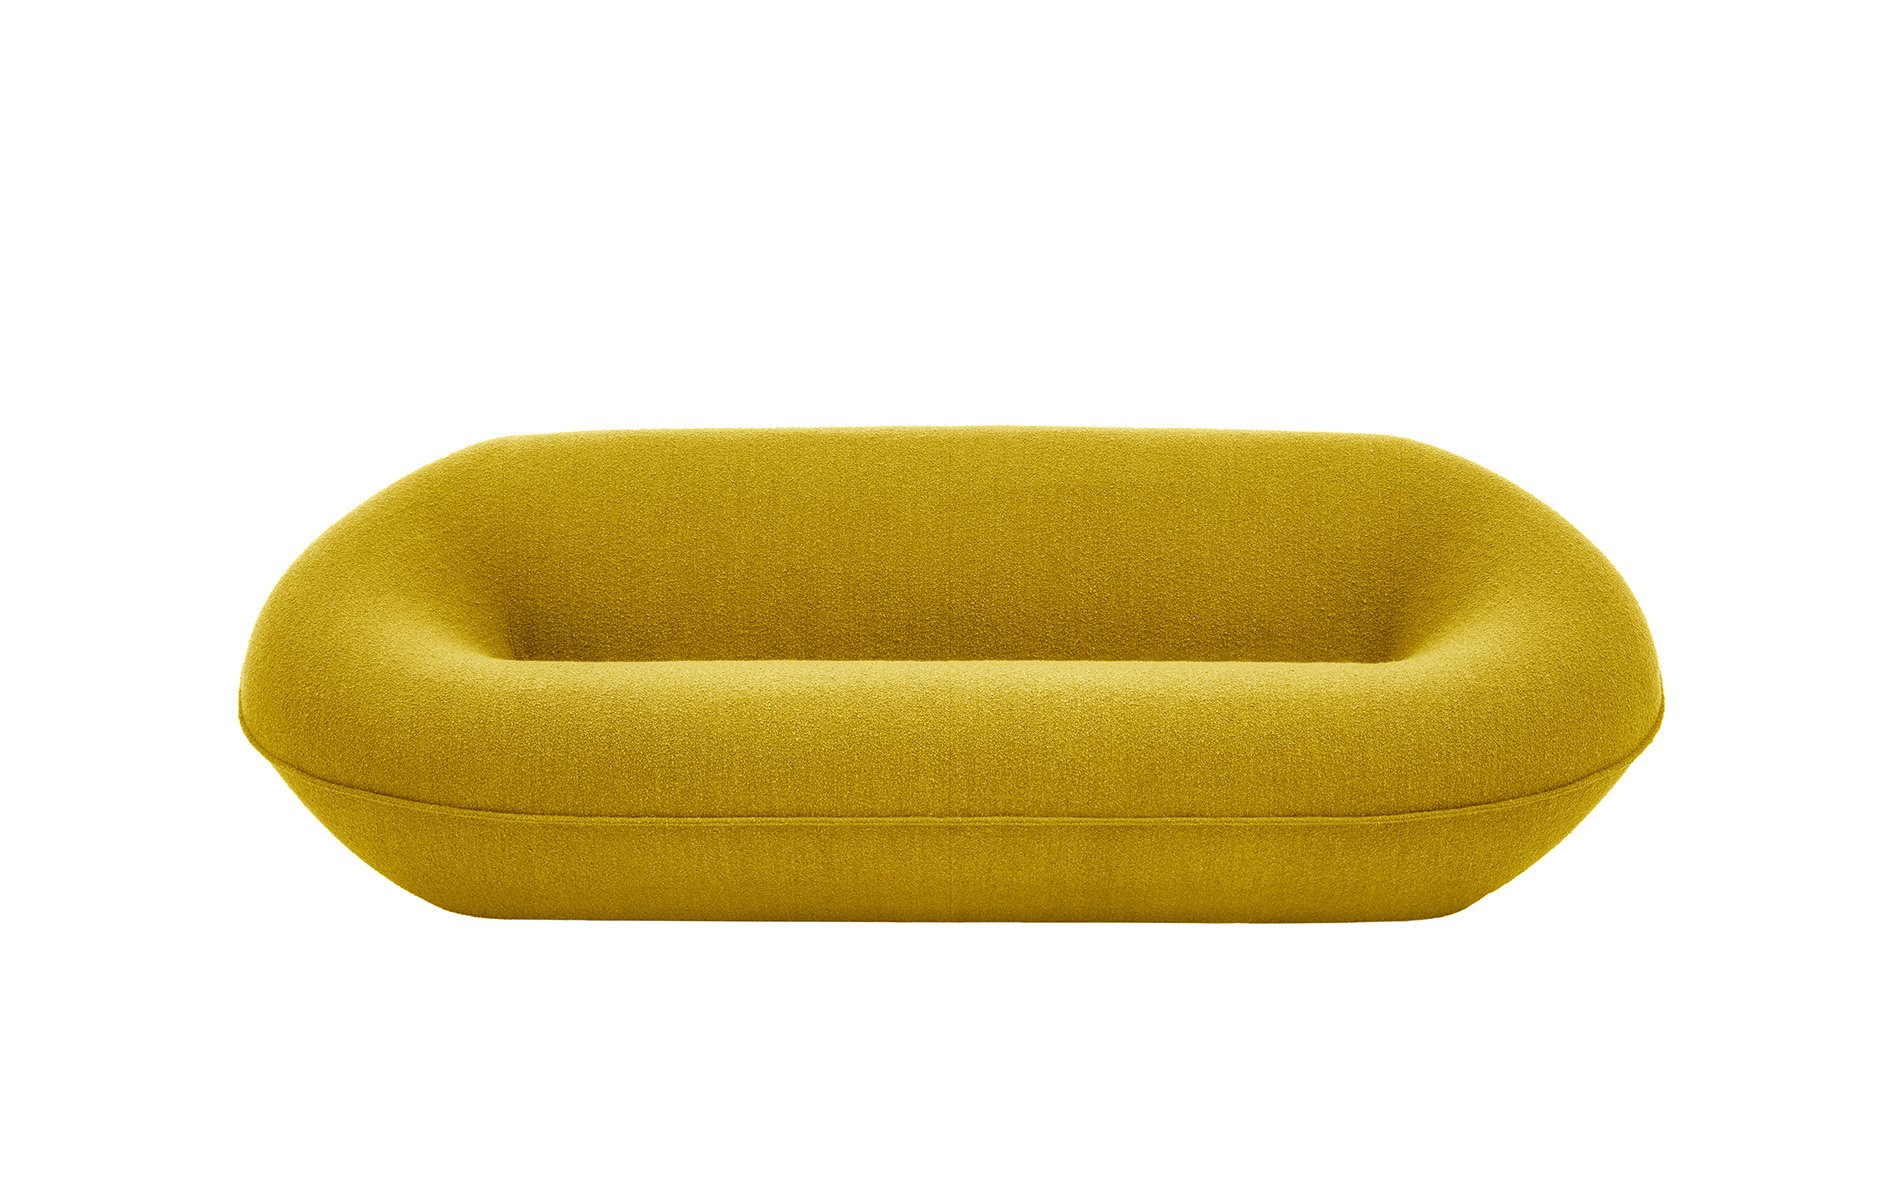 The Tortello sofa designed by Barber Osgerby for B&B Italia is made using recycled polyethylene and no adhesive or glues so that is can be fully disassembled and easy to recycle. Photo c/o B&B Italia.